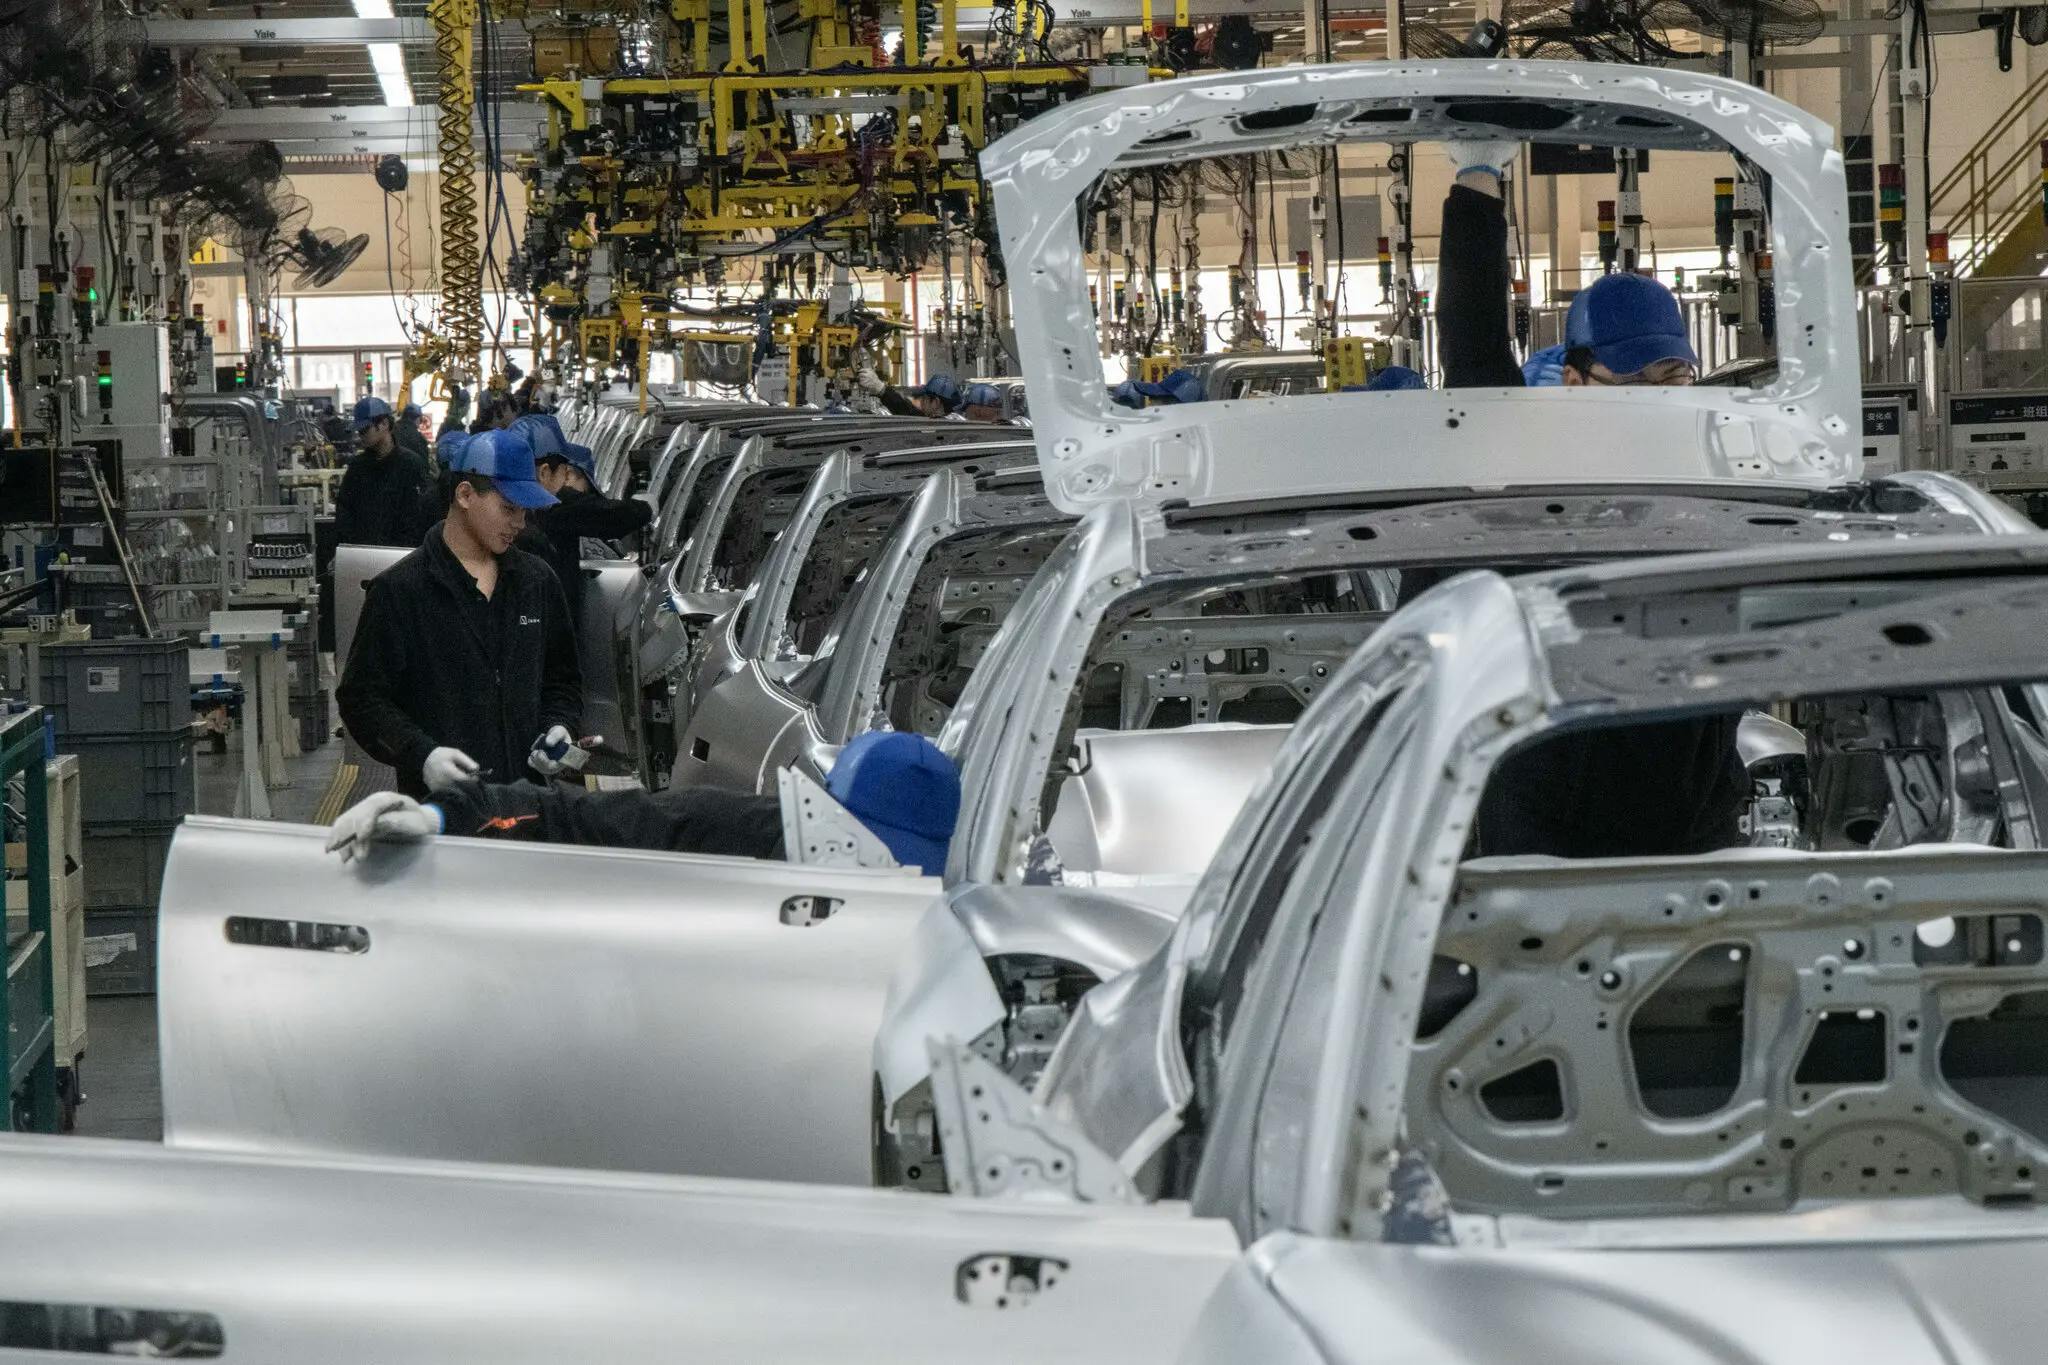 Vehicles on an assembly line